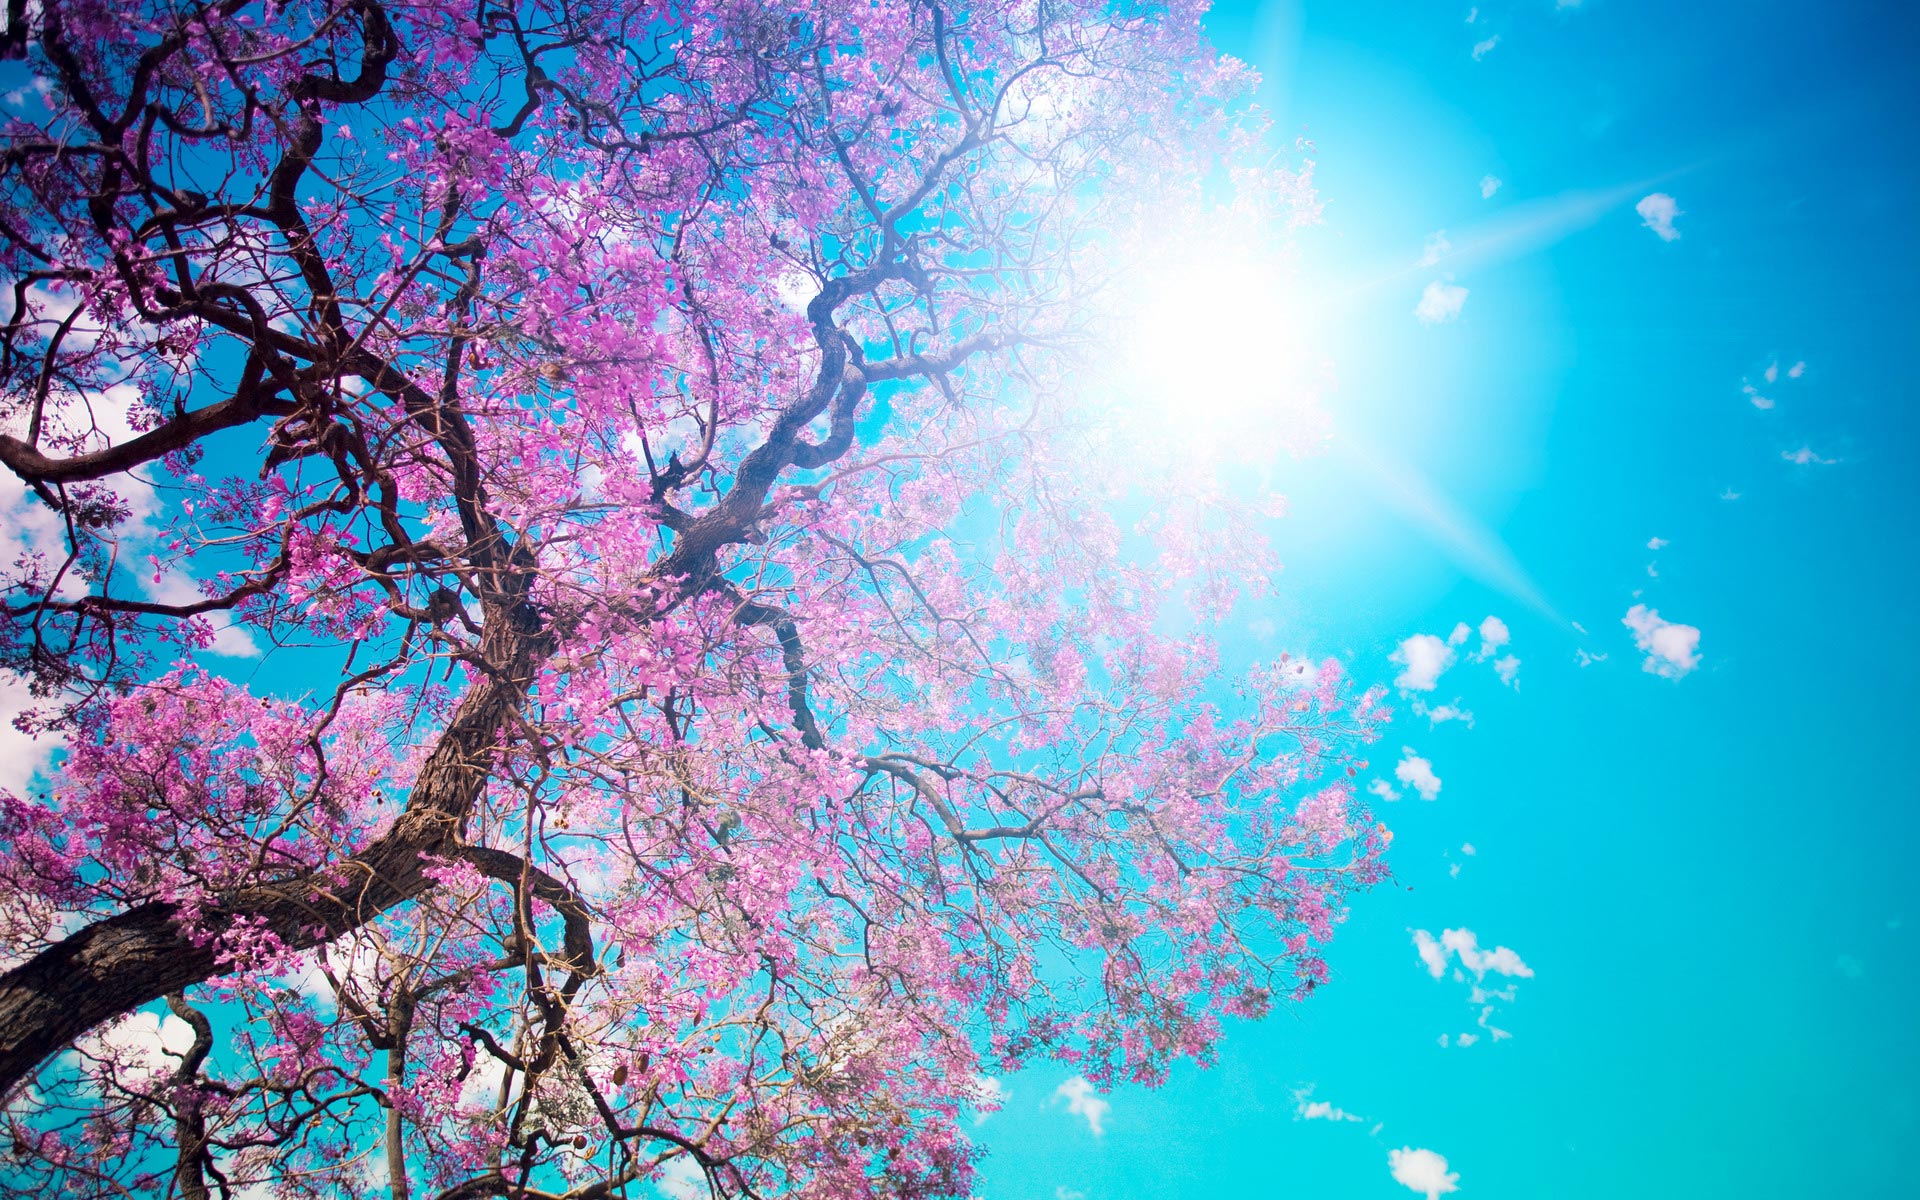 Scenery Wallpaper Includes The Scene Of Blooming Spring Simply Good